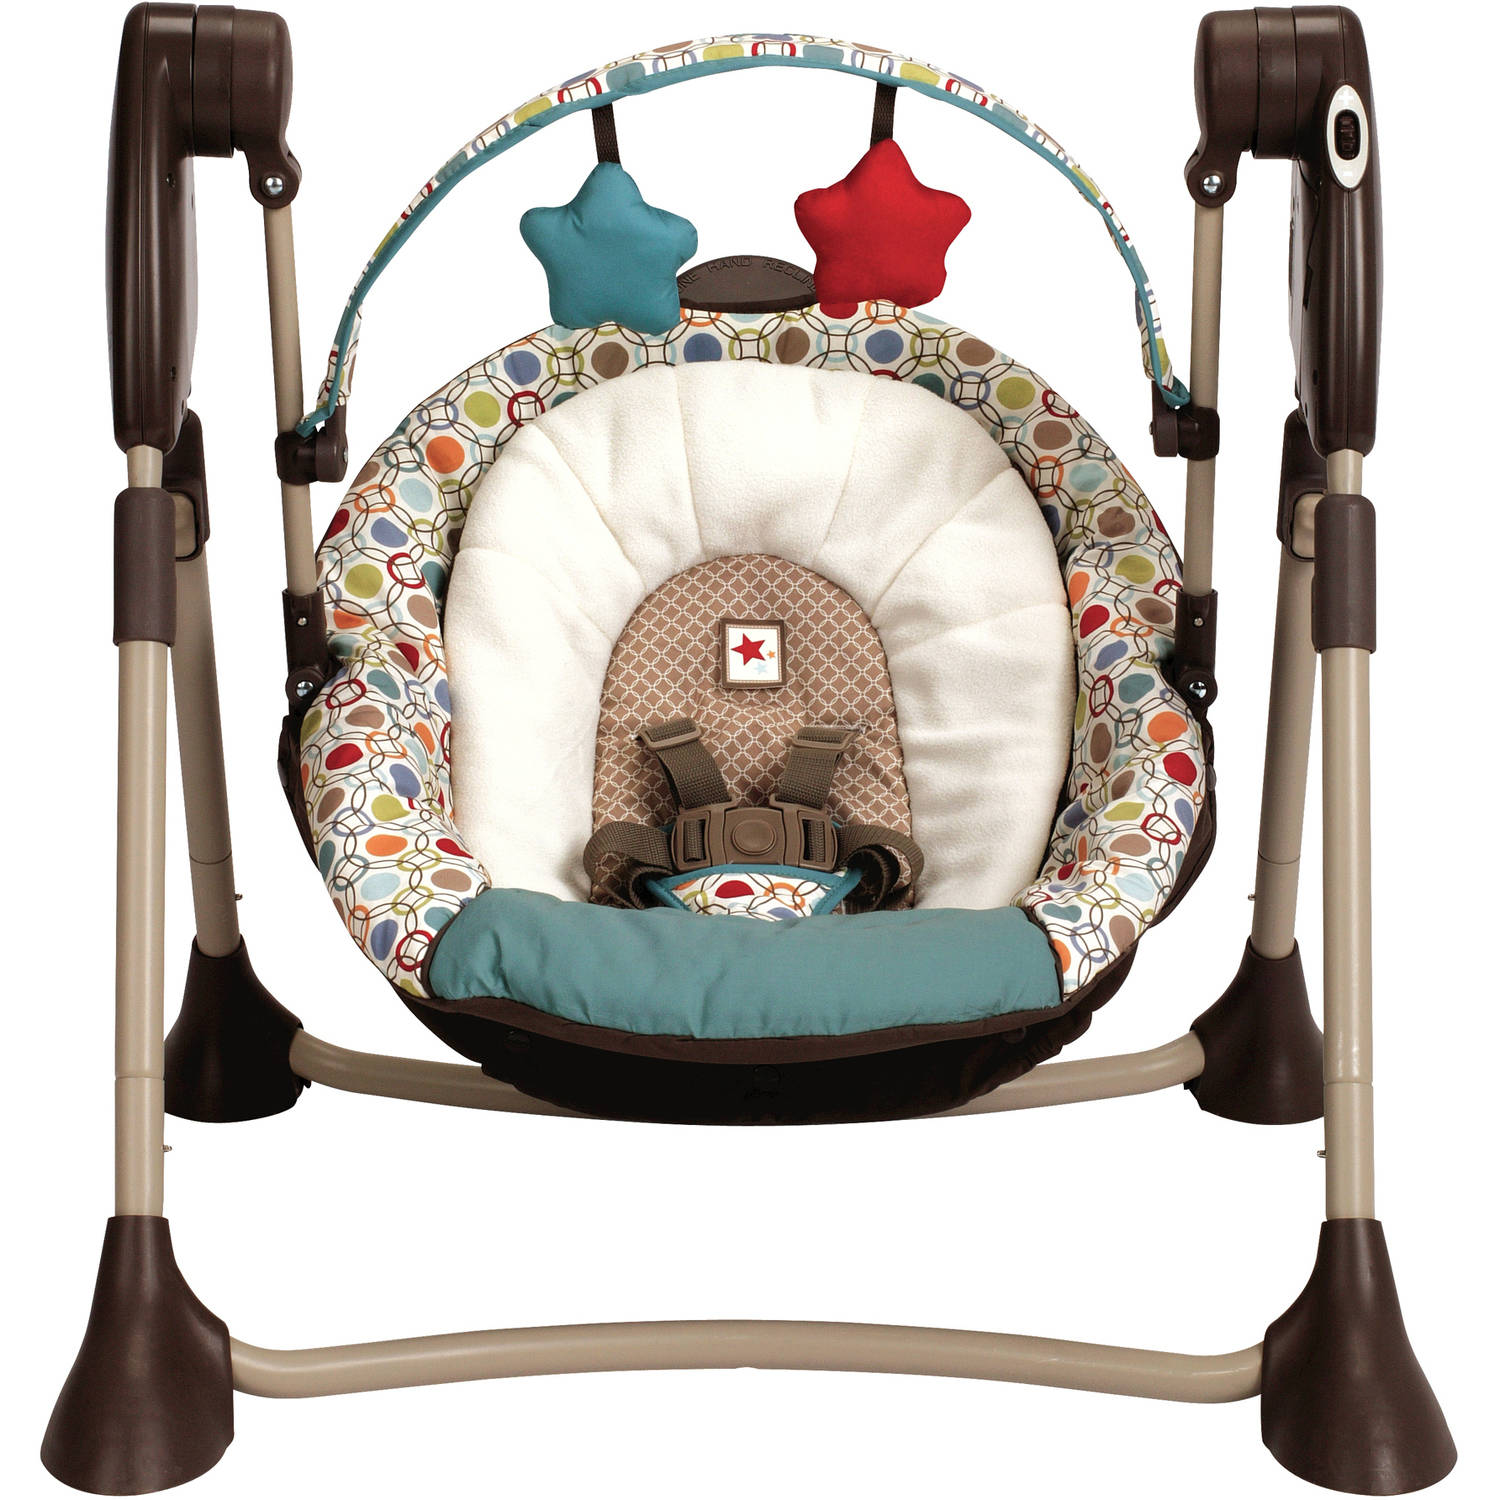 Graco Swing By Me Twister - image 2 of 6